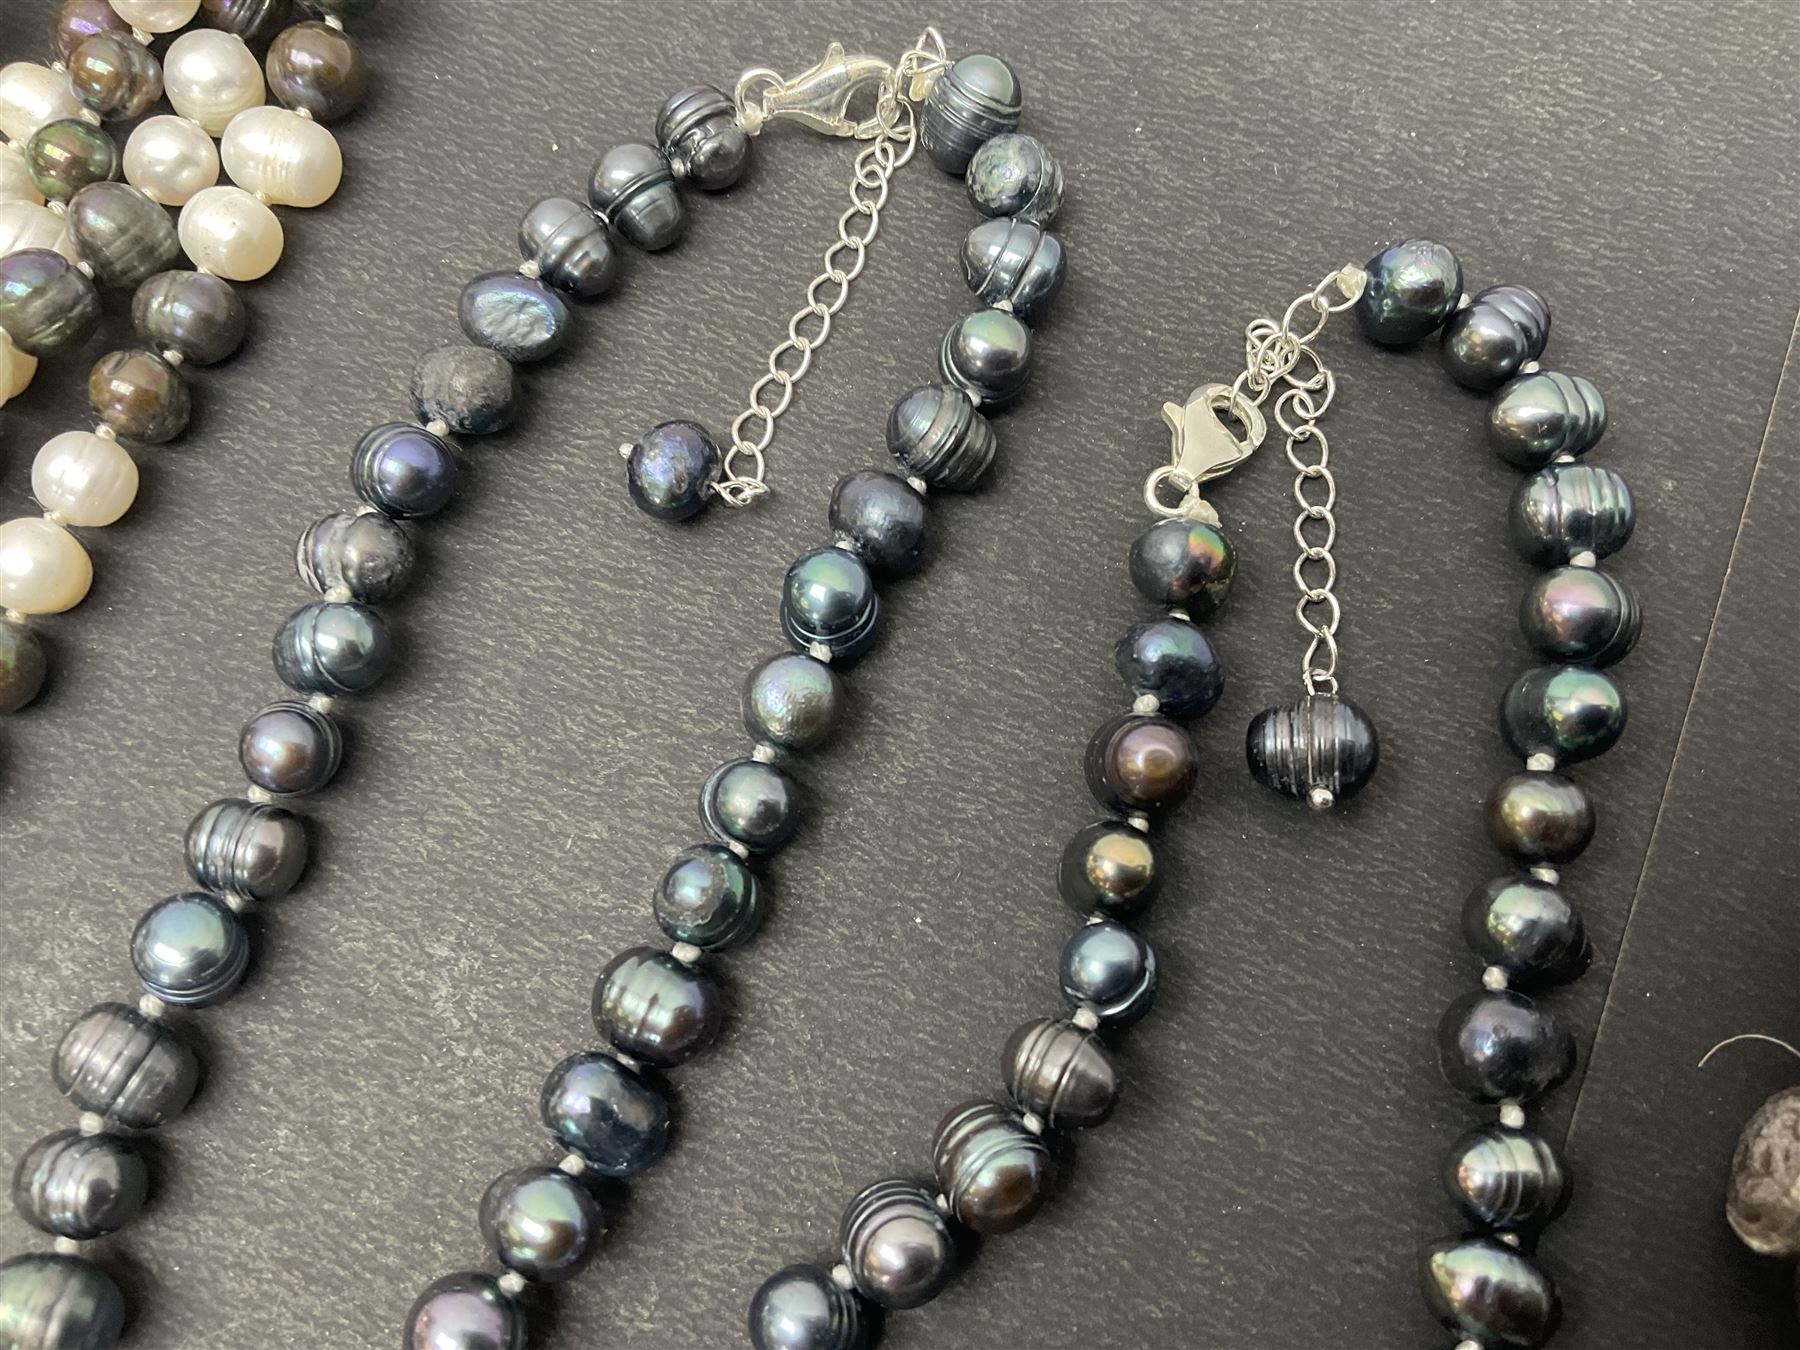 Four fresh water pearl necklaces - Image 19 of 77